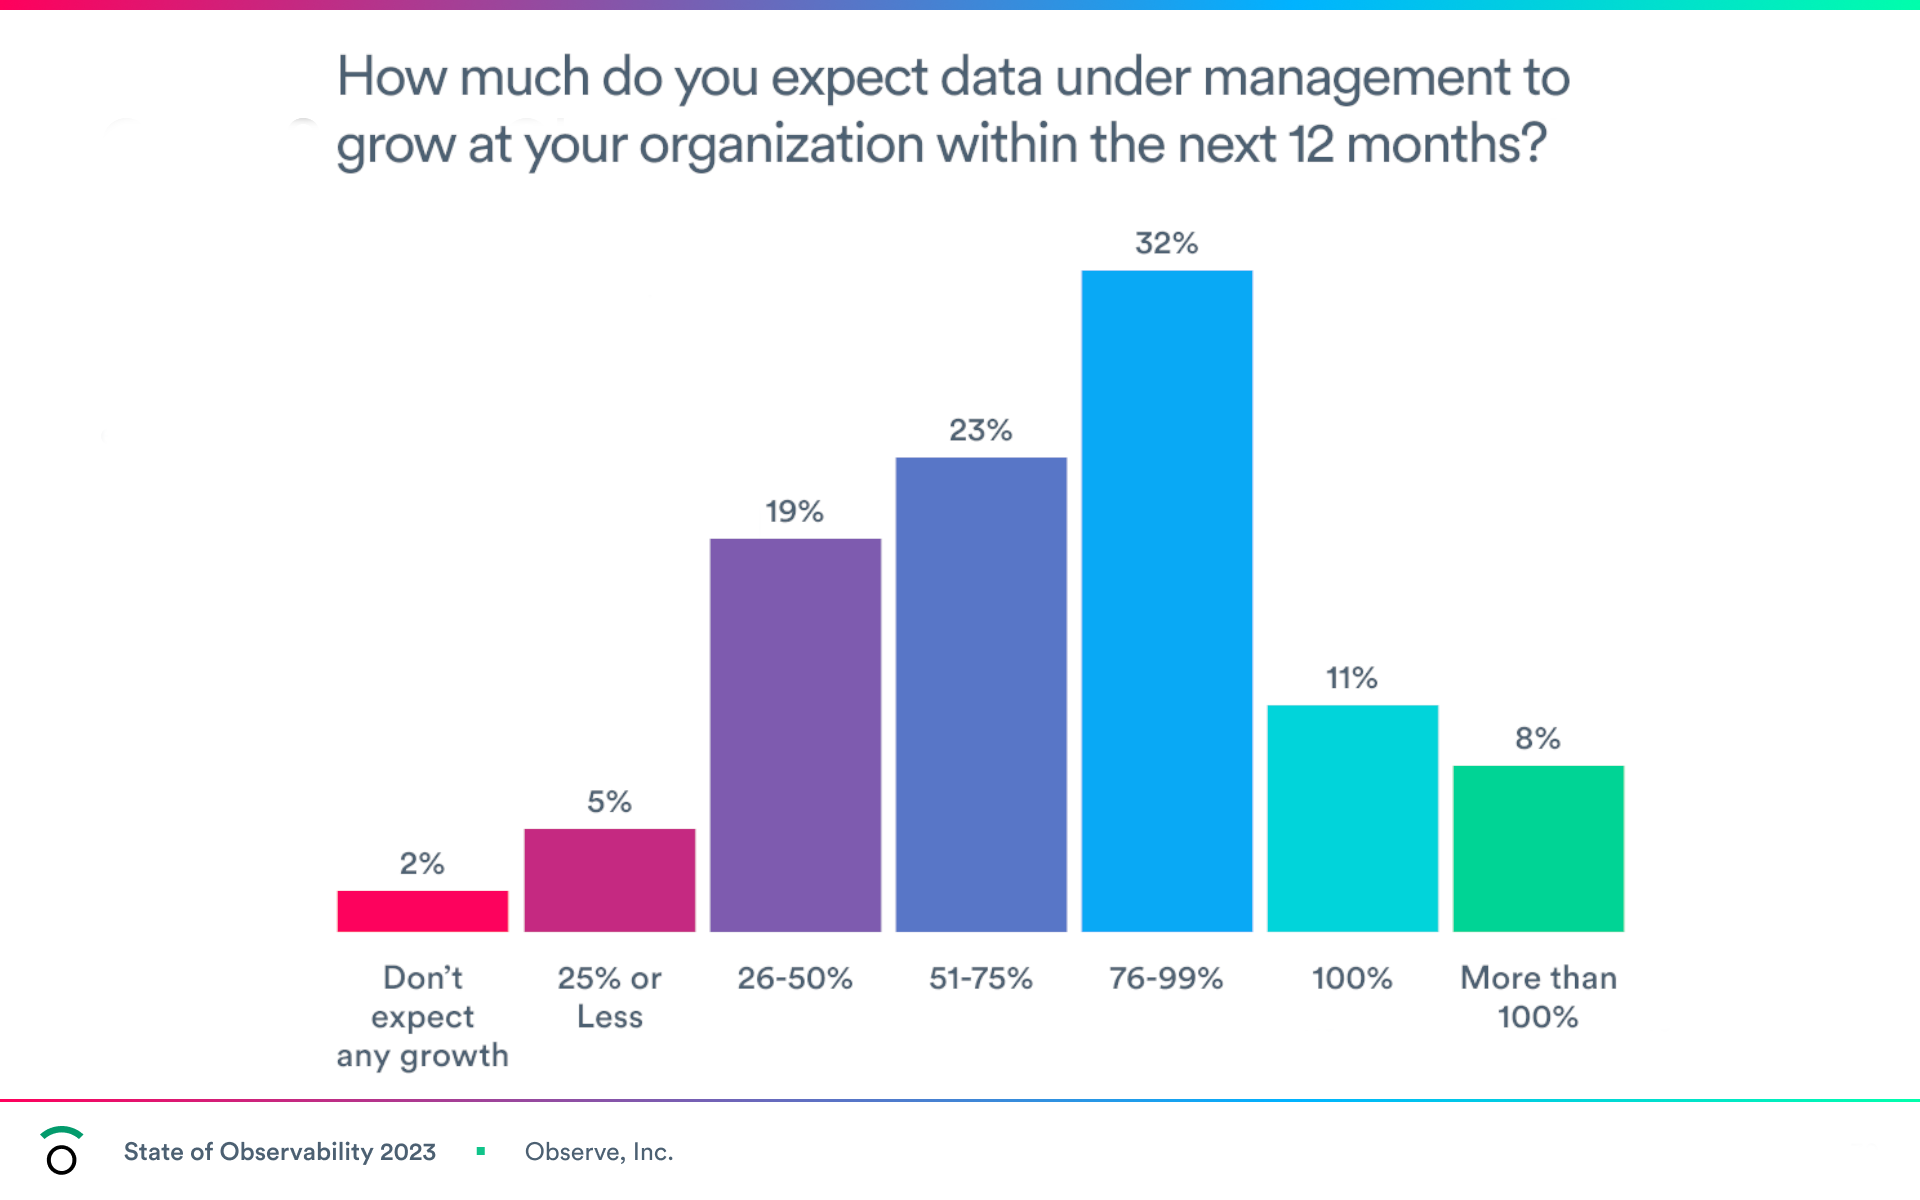 Expected data growth in next 12 months